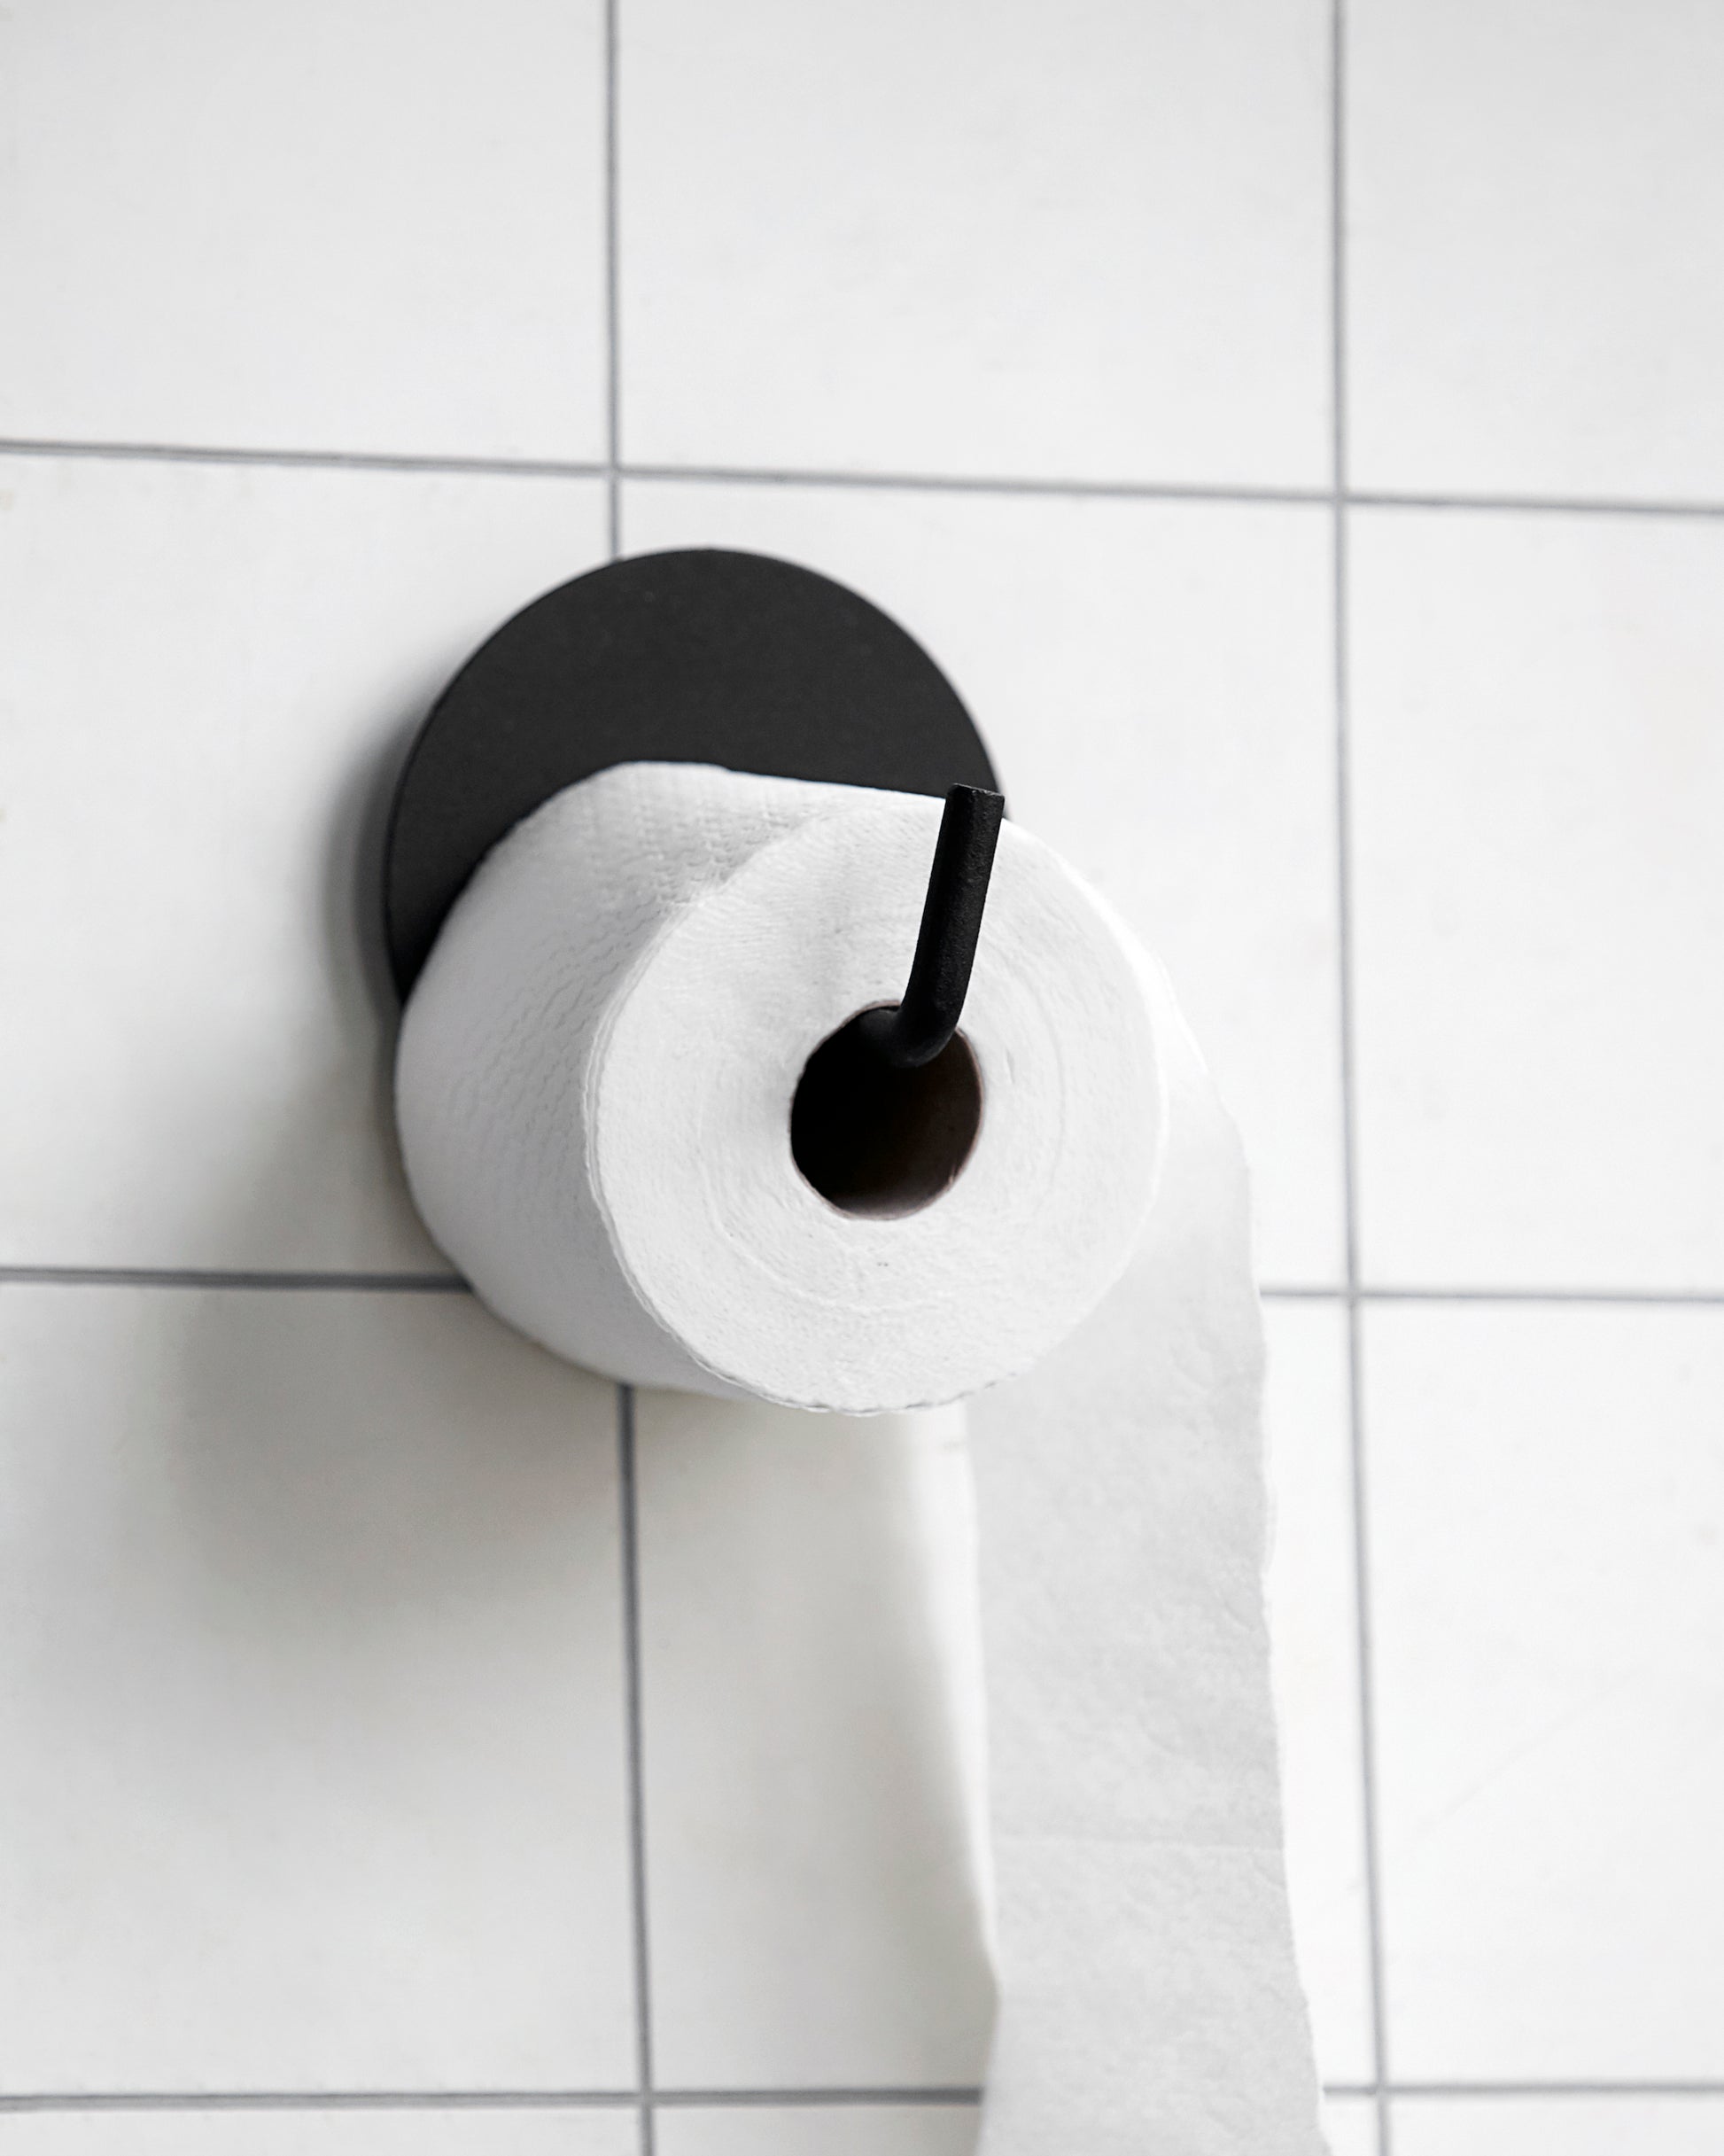 simple black toilet roll holder attached to a white tiled wall